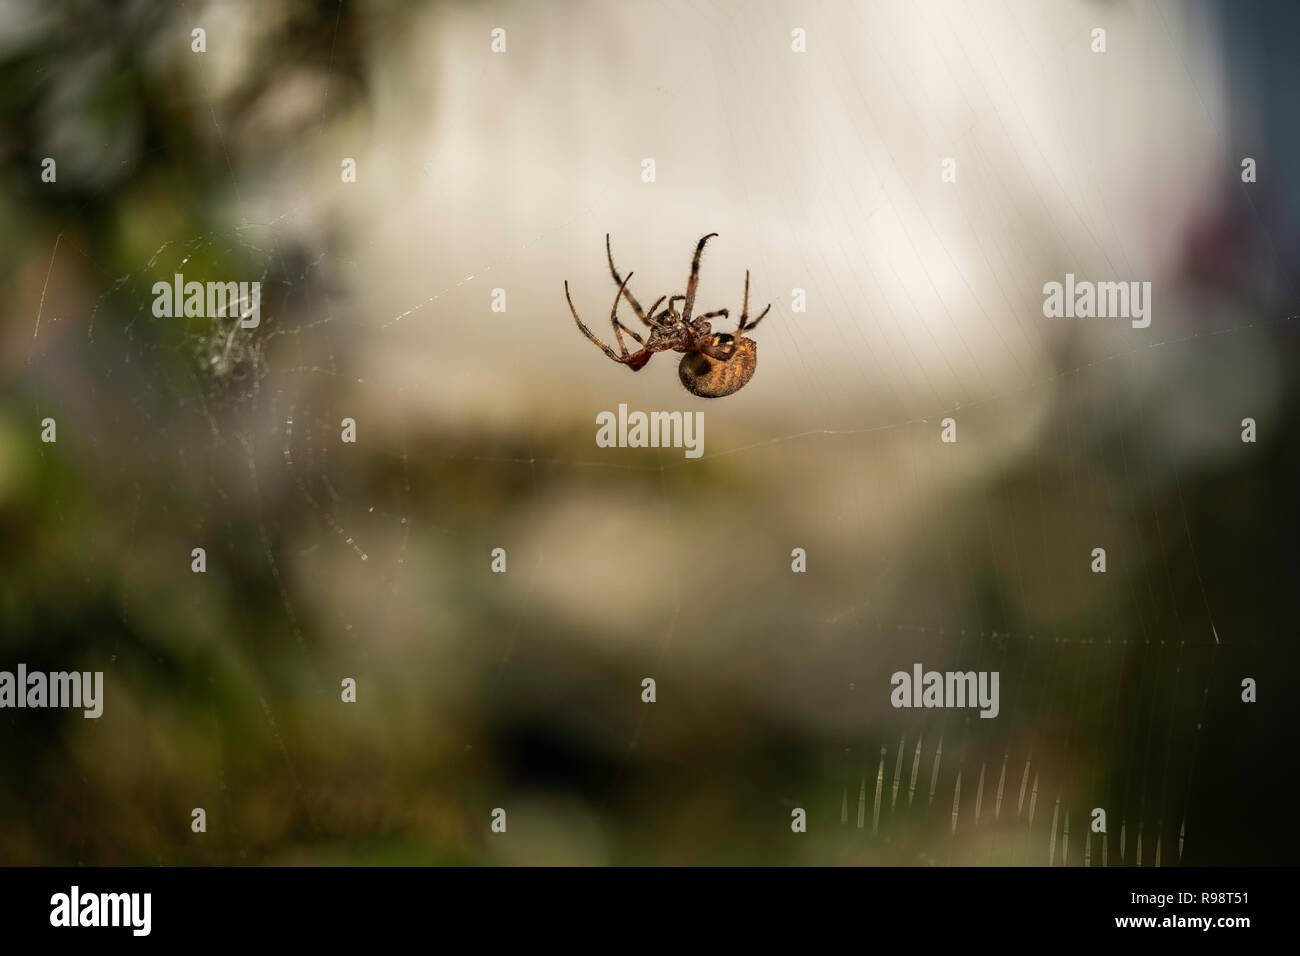 Orb Weaver, Araneus cavaticus, or Charlotte A. Cavatica, as in “Charlotte’s Web” spinning a web in late summer. Wichita, Kansas, USA. Stock Photo